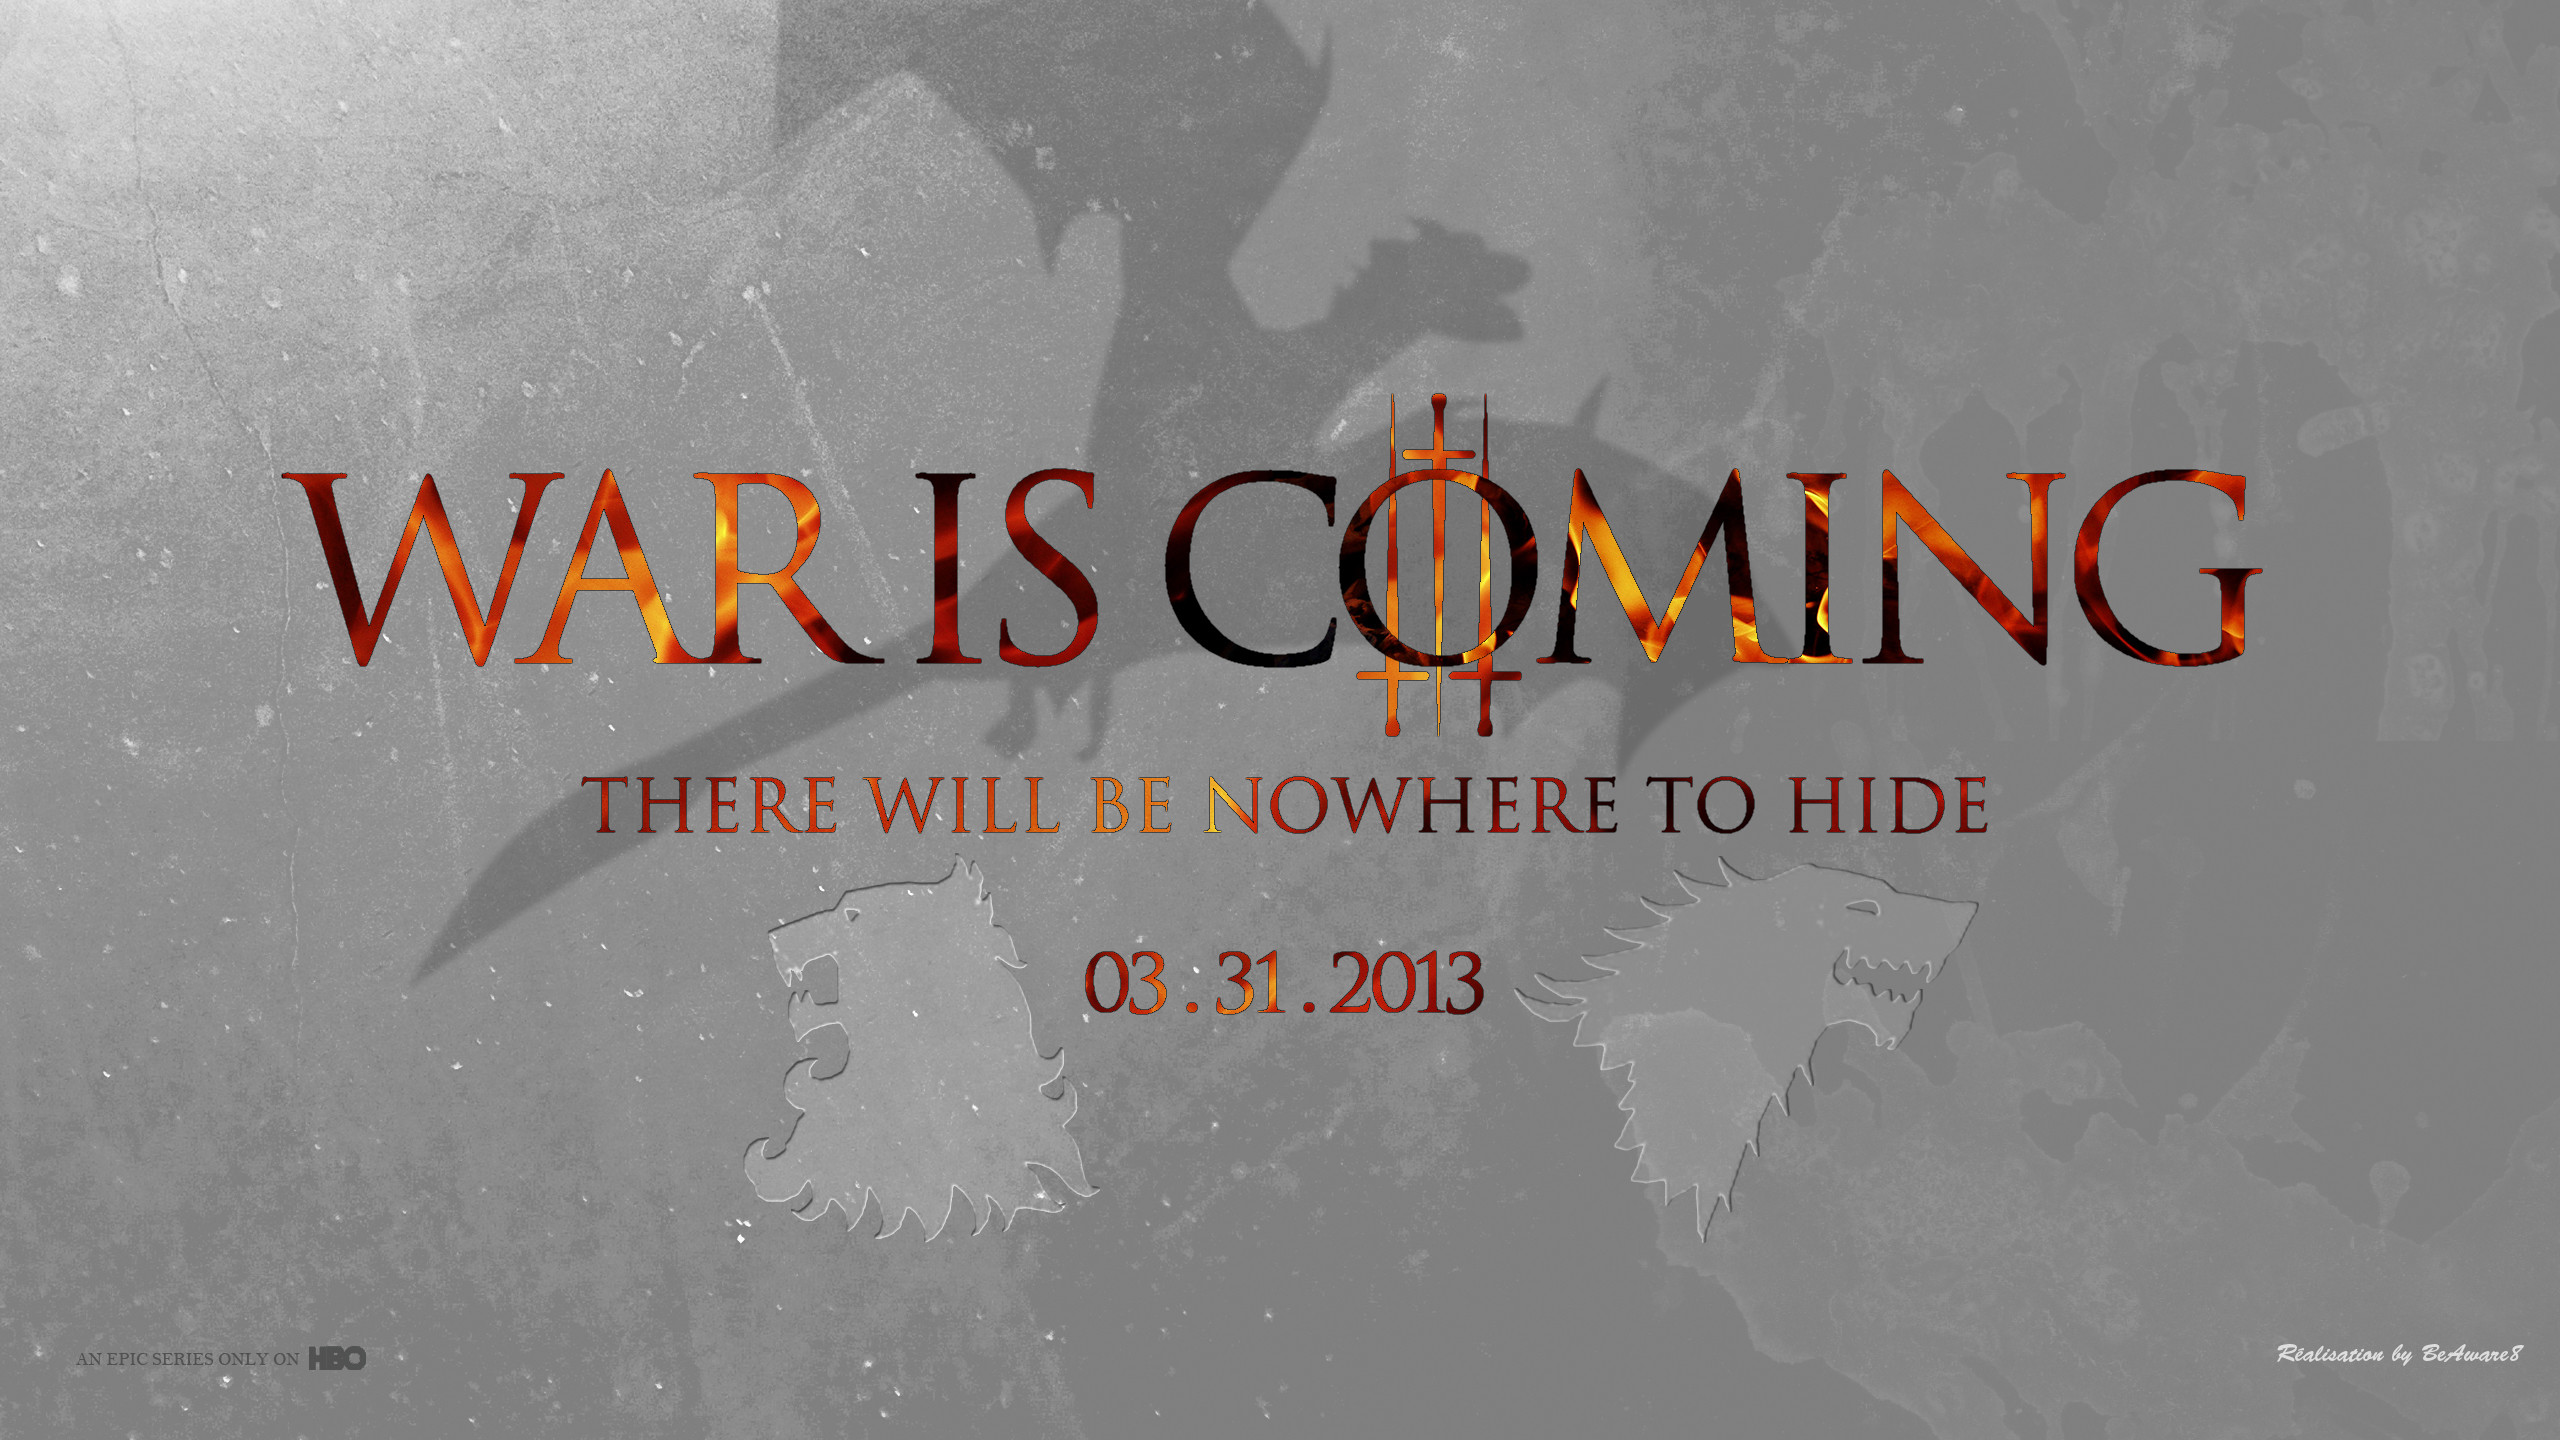 2560x1440 ... Game Of Thrones Wallpaper War Is Coming by BeAware8